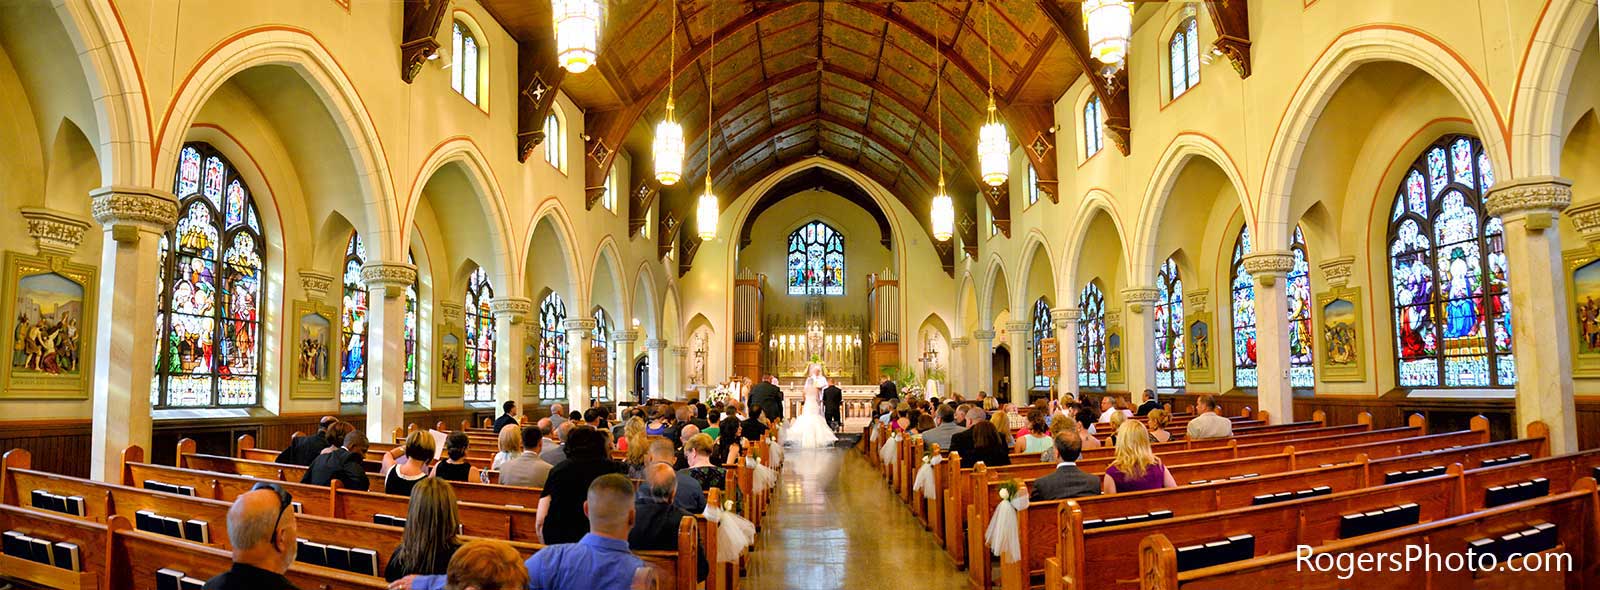  inside of a church wedding in Connecticut before photo retouching